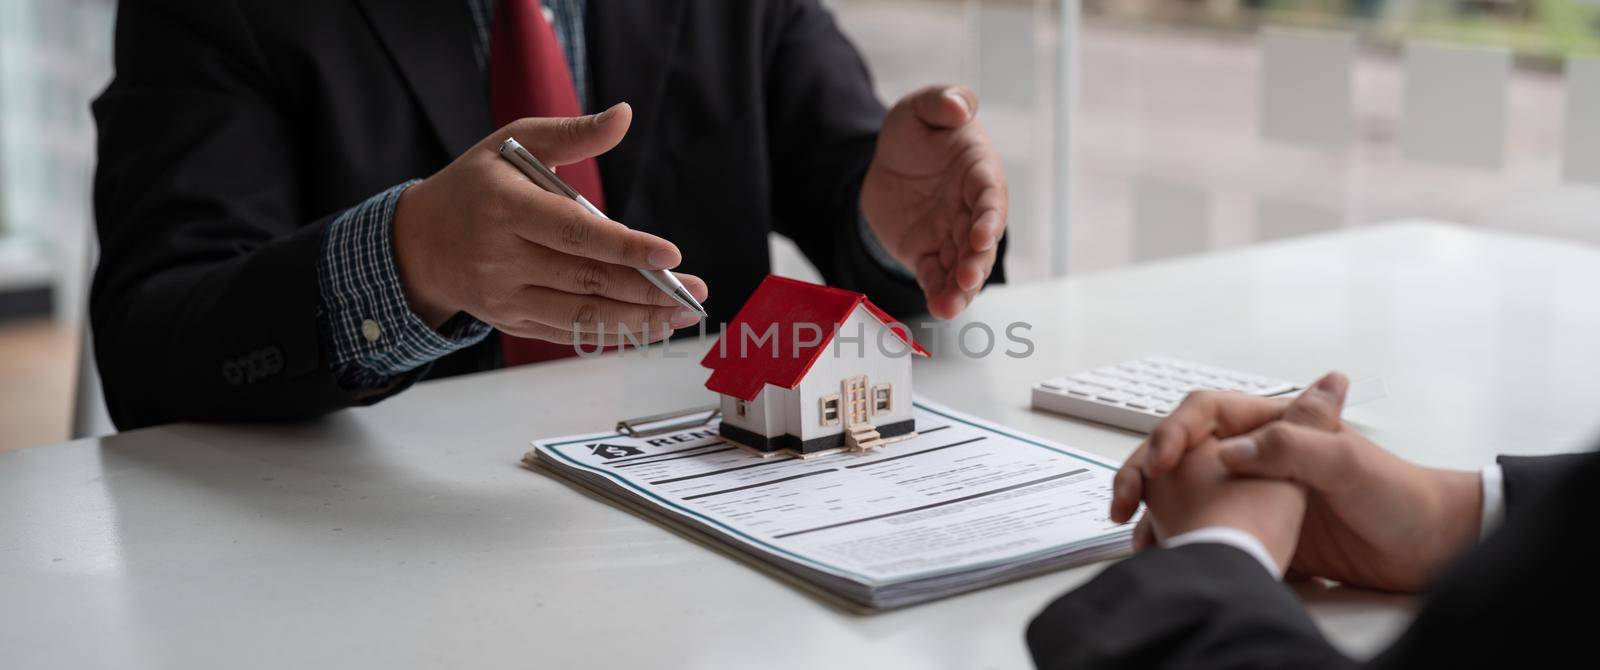 Real estate concept - businessman offer to signs contract with home architectural model at his office by nateemee